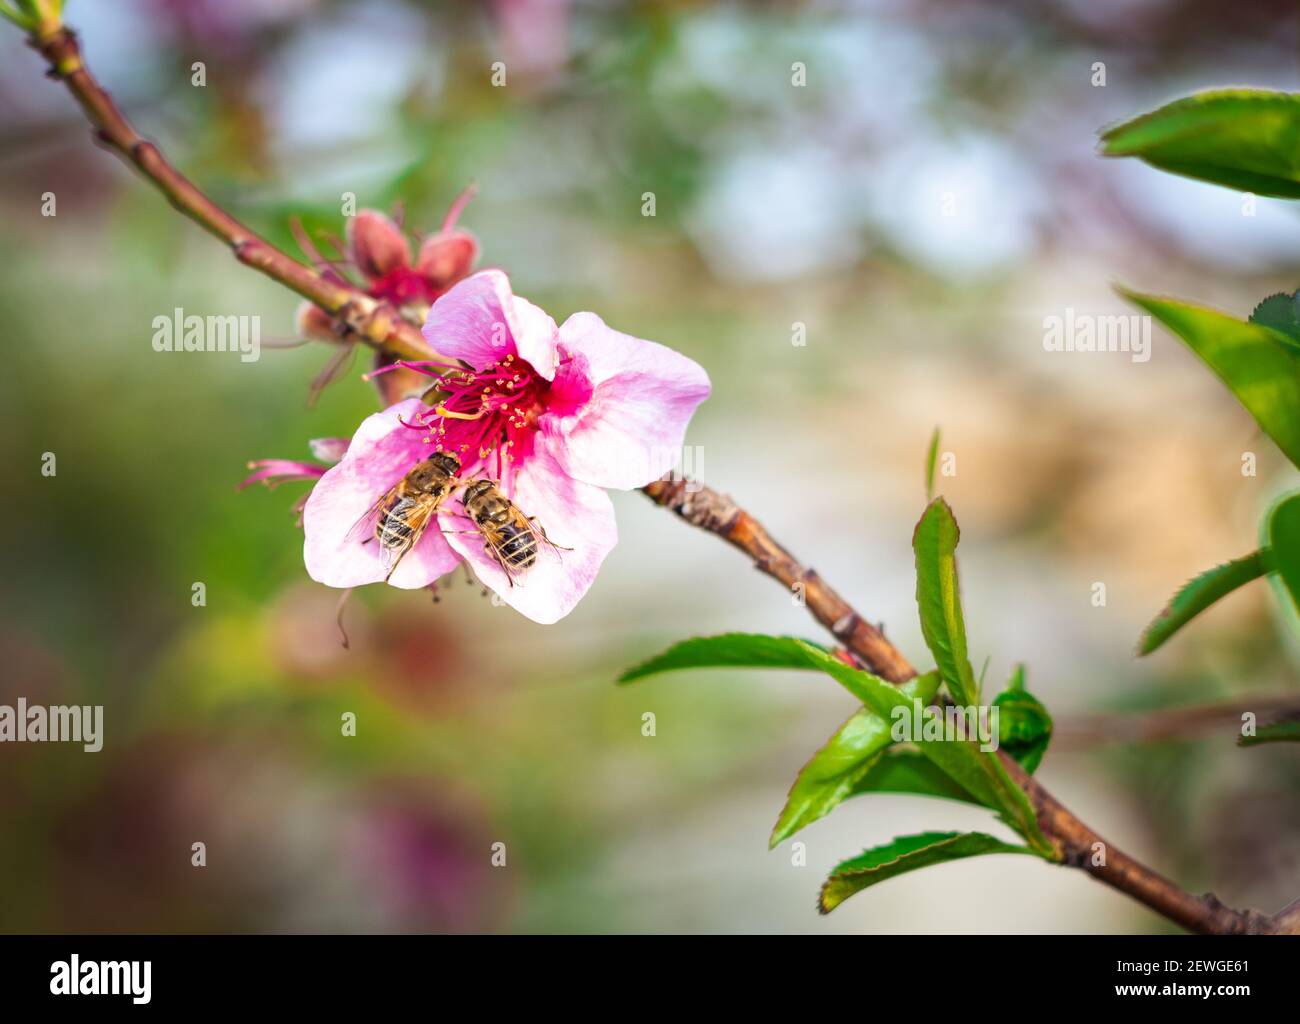 Two bees pollinate and feed on nectar of a pink flower of a peach tree at midday in a garden. Stock Photo